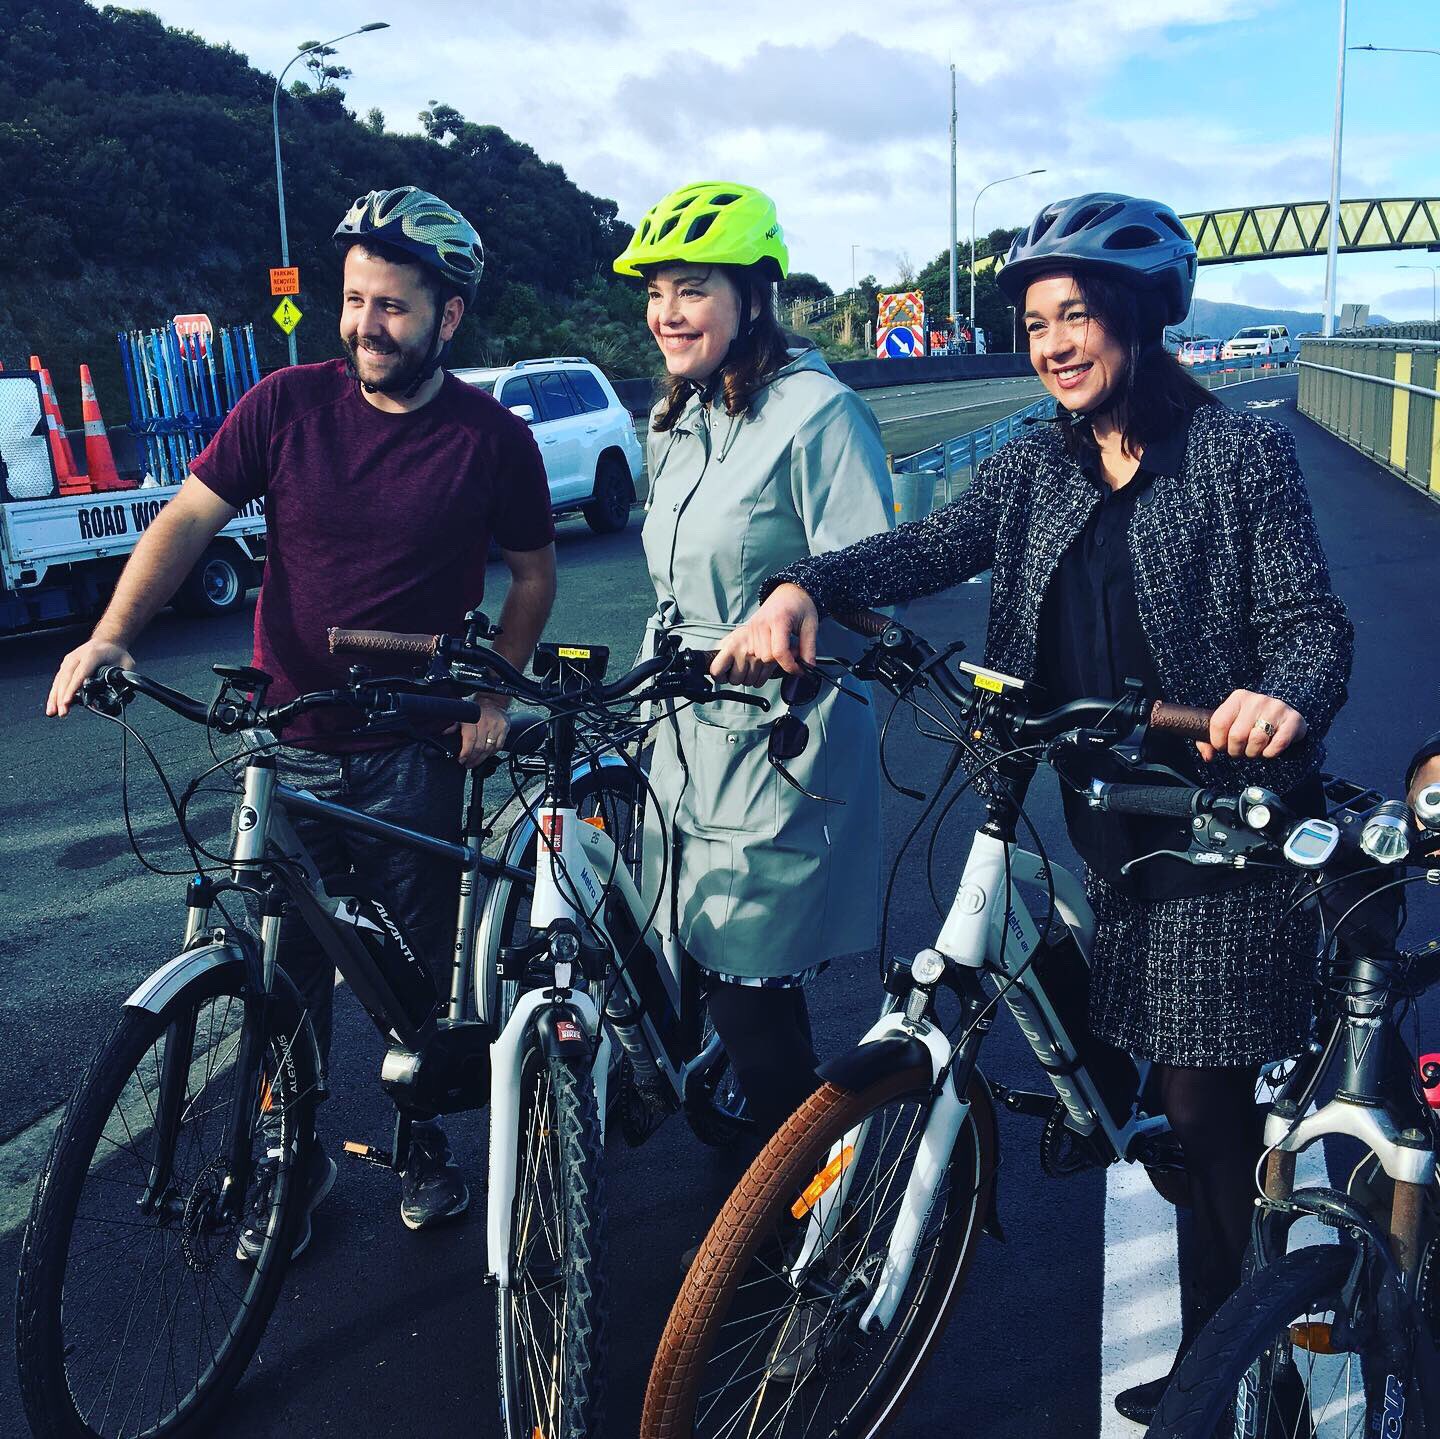 New Zealand – Discounted electric-bikes offered to public sector workers